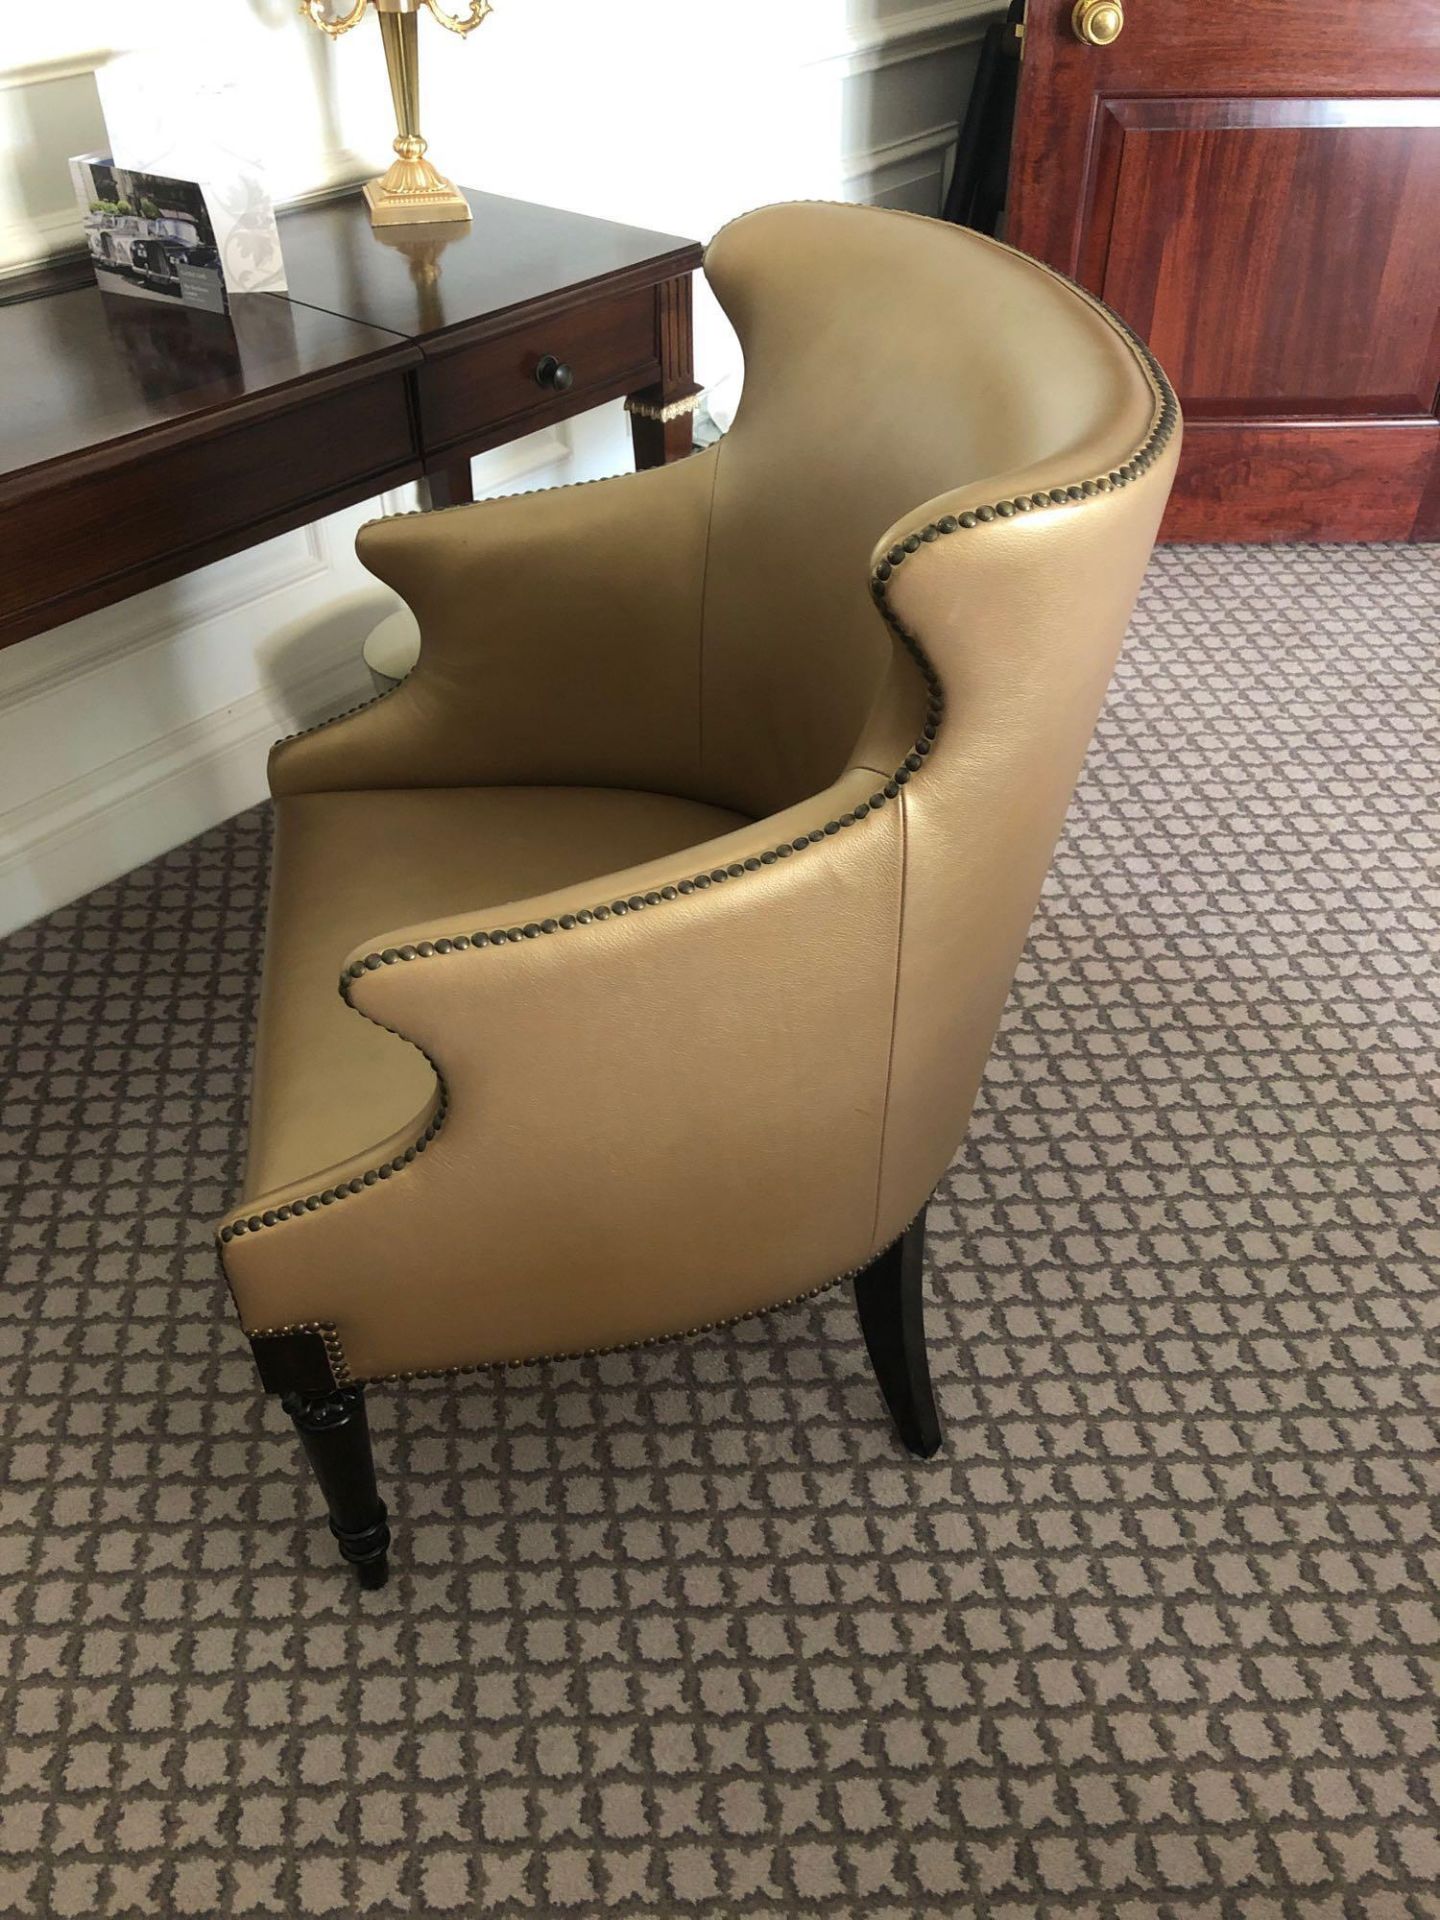 A Modern Wing Back Chair Upholstered In Gold Leather With Pin Stud Detail On Dark Solid Wood Frame - Image 2 of 2